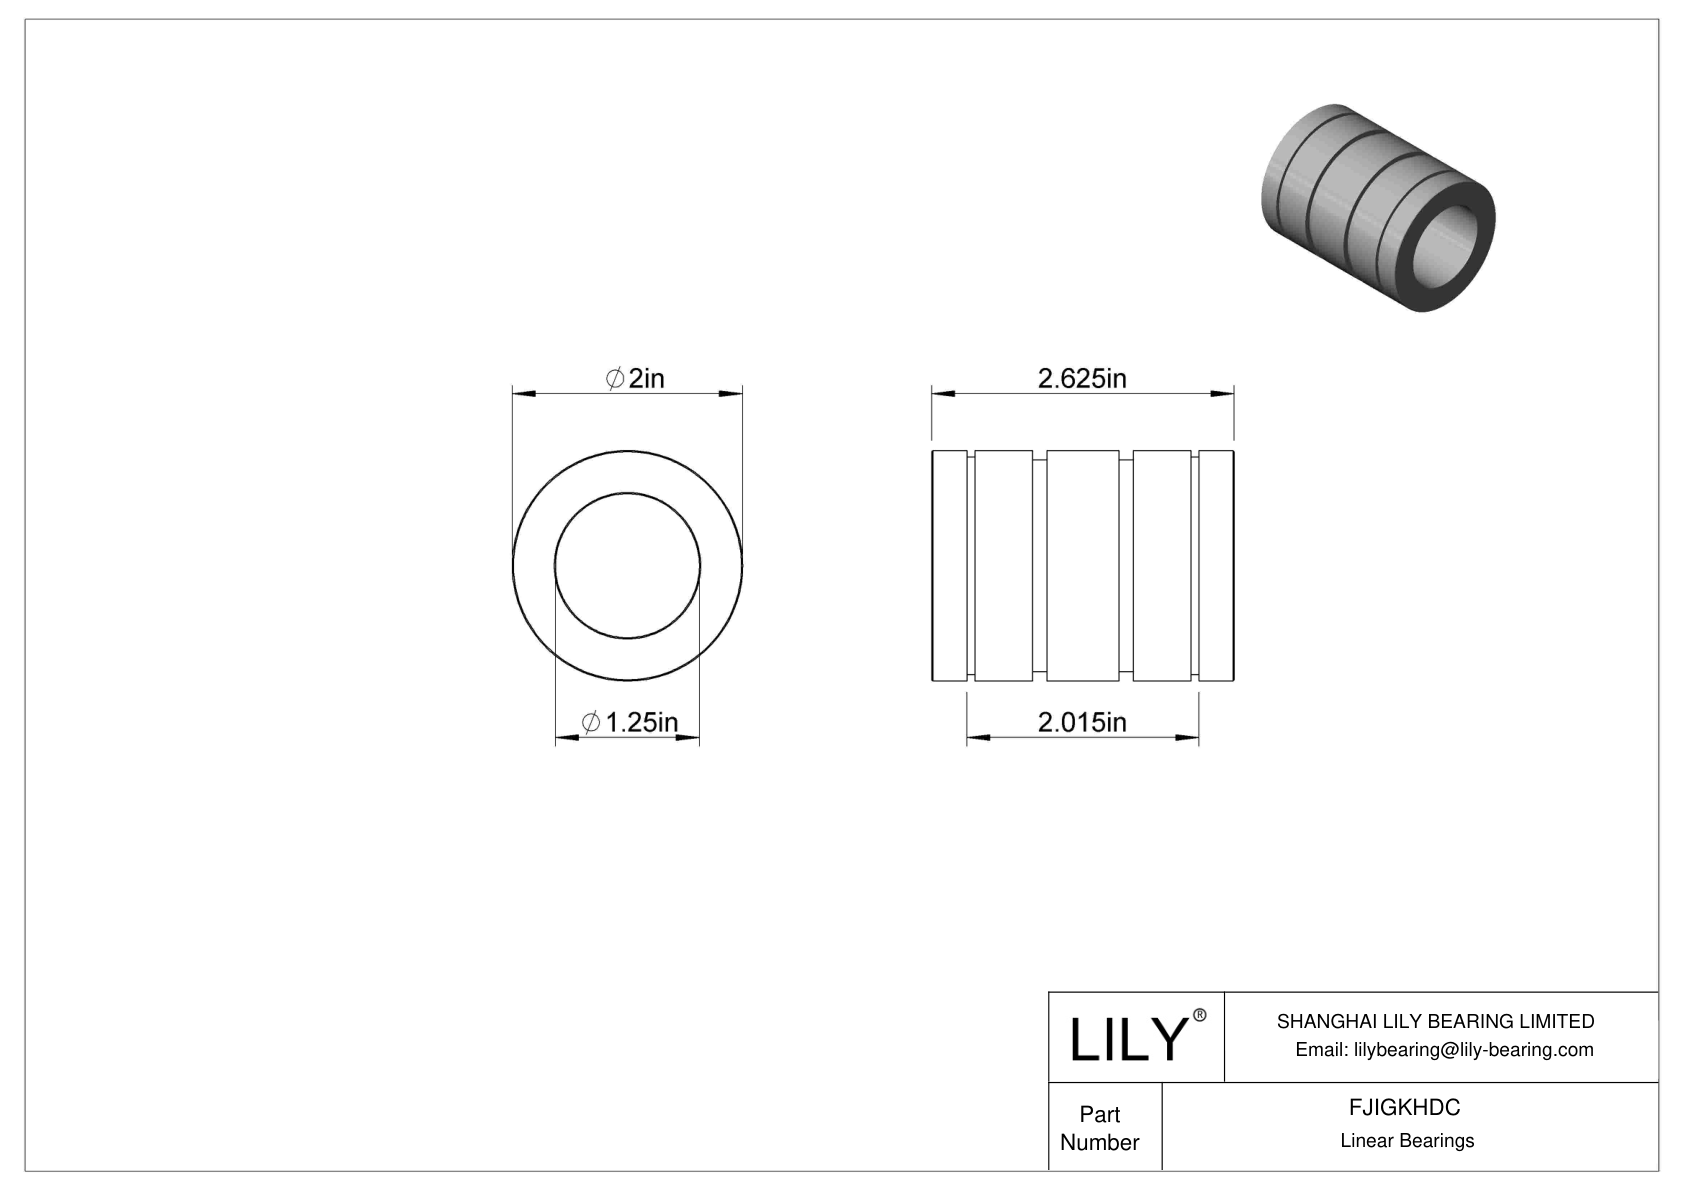 FJIGKHDC Common Linear Sleeve Bearings cad drawing